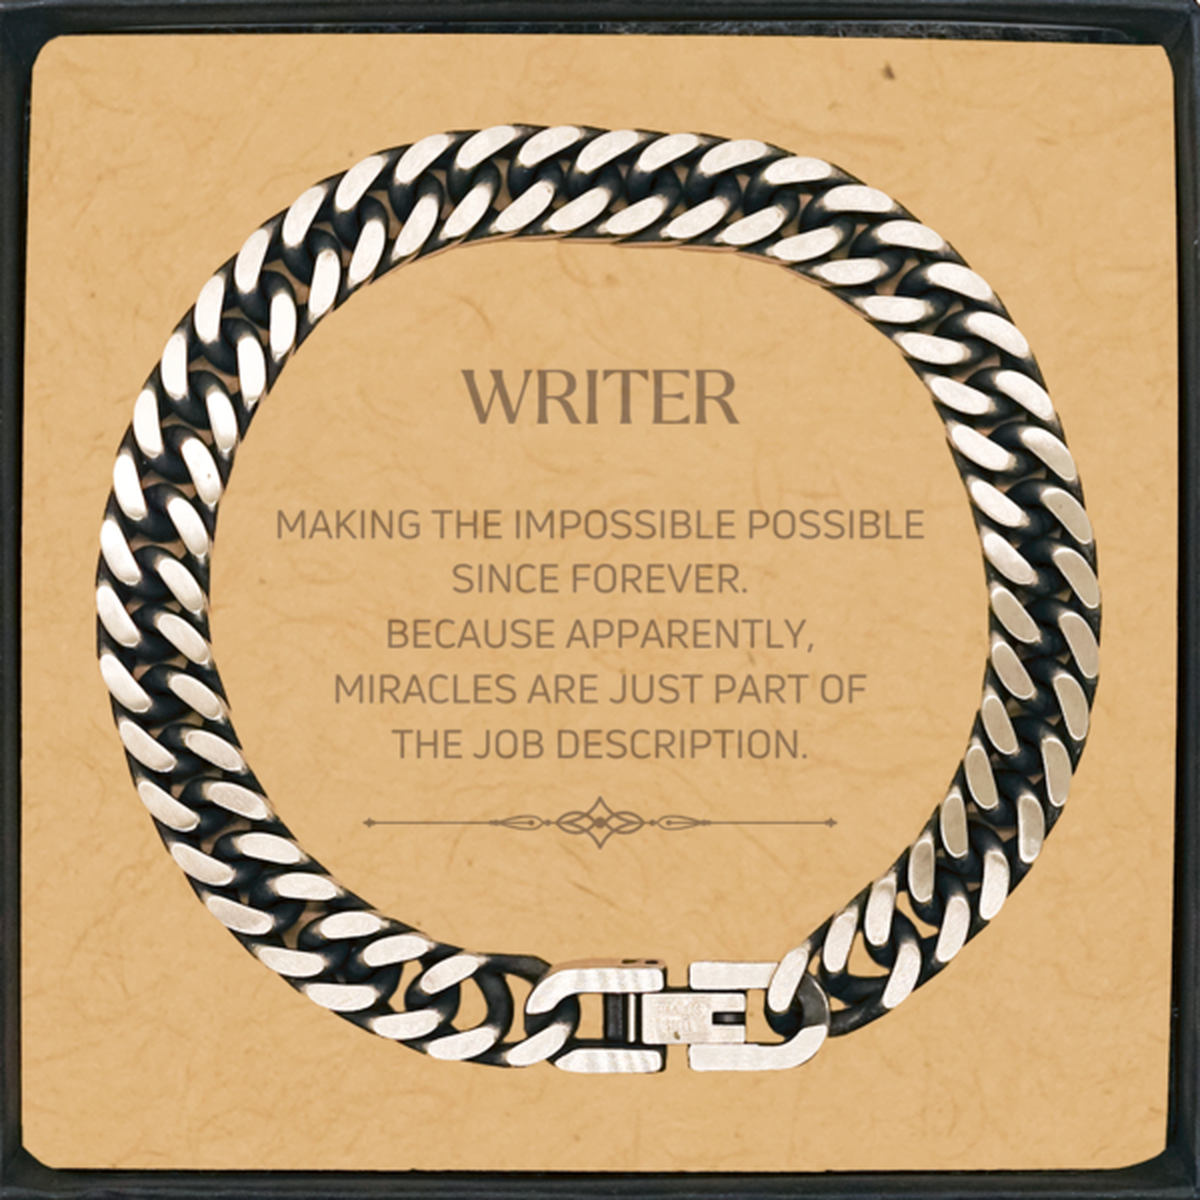 Funny Writer Gifts, Miracles are just part of the job description, Inspirational Birthday Cuban Link Chain Bracelet For Writer, Men, Women, Coworkers, Friends, Boss